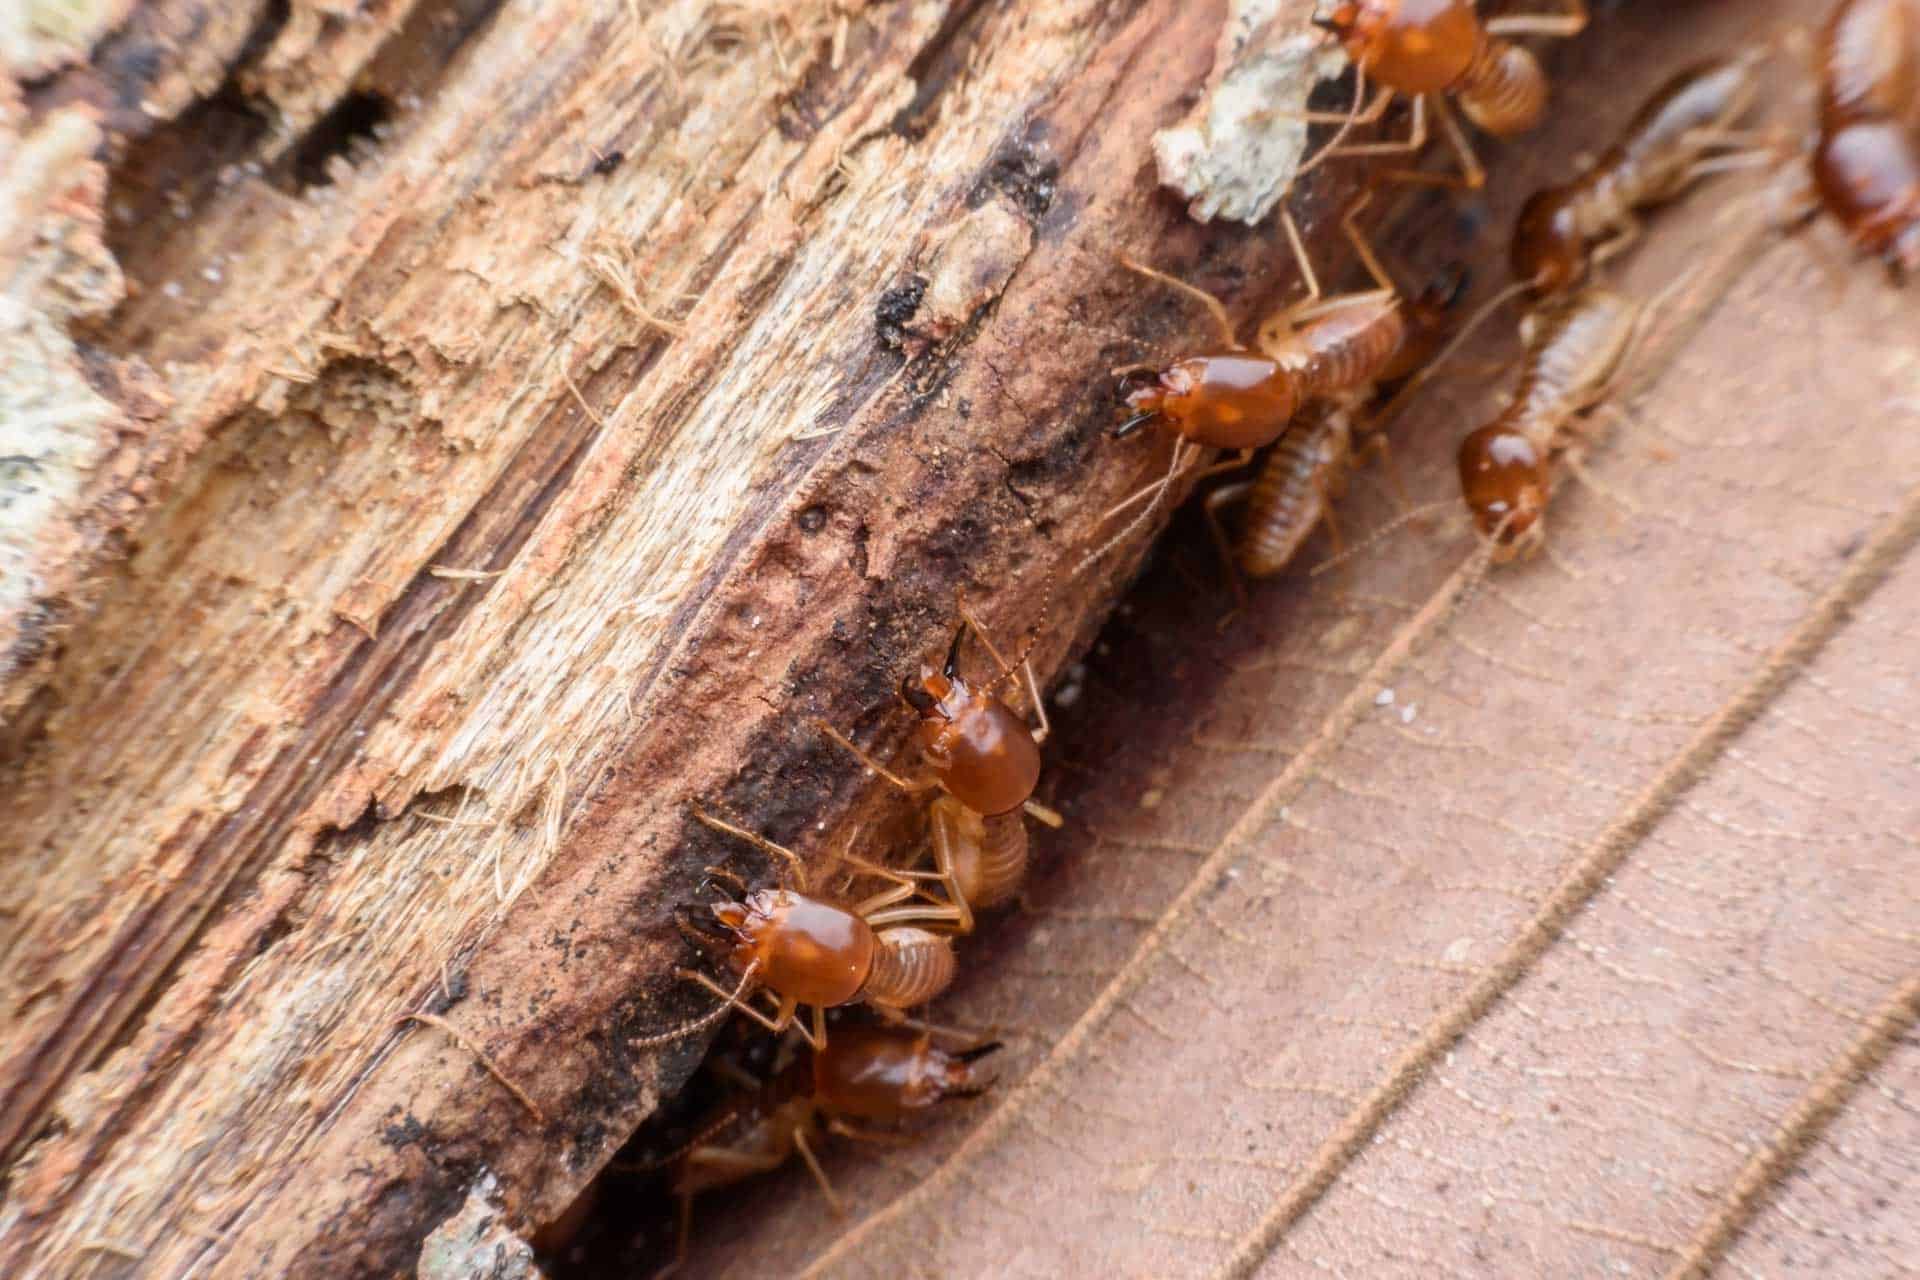 demystifying termite damage repair costs: facing the reality